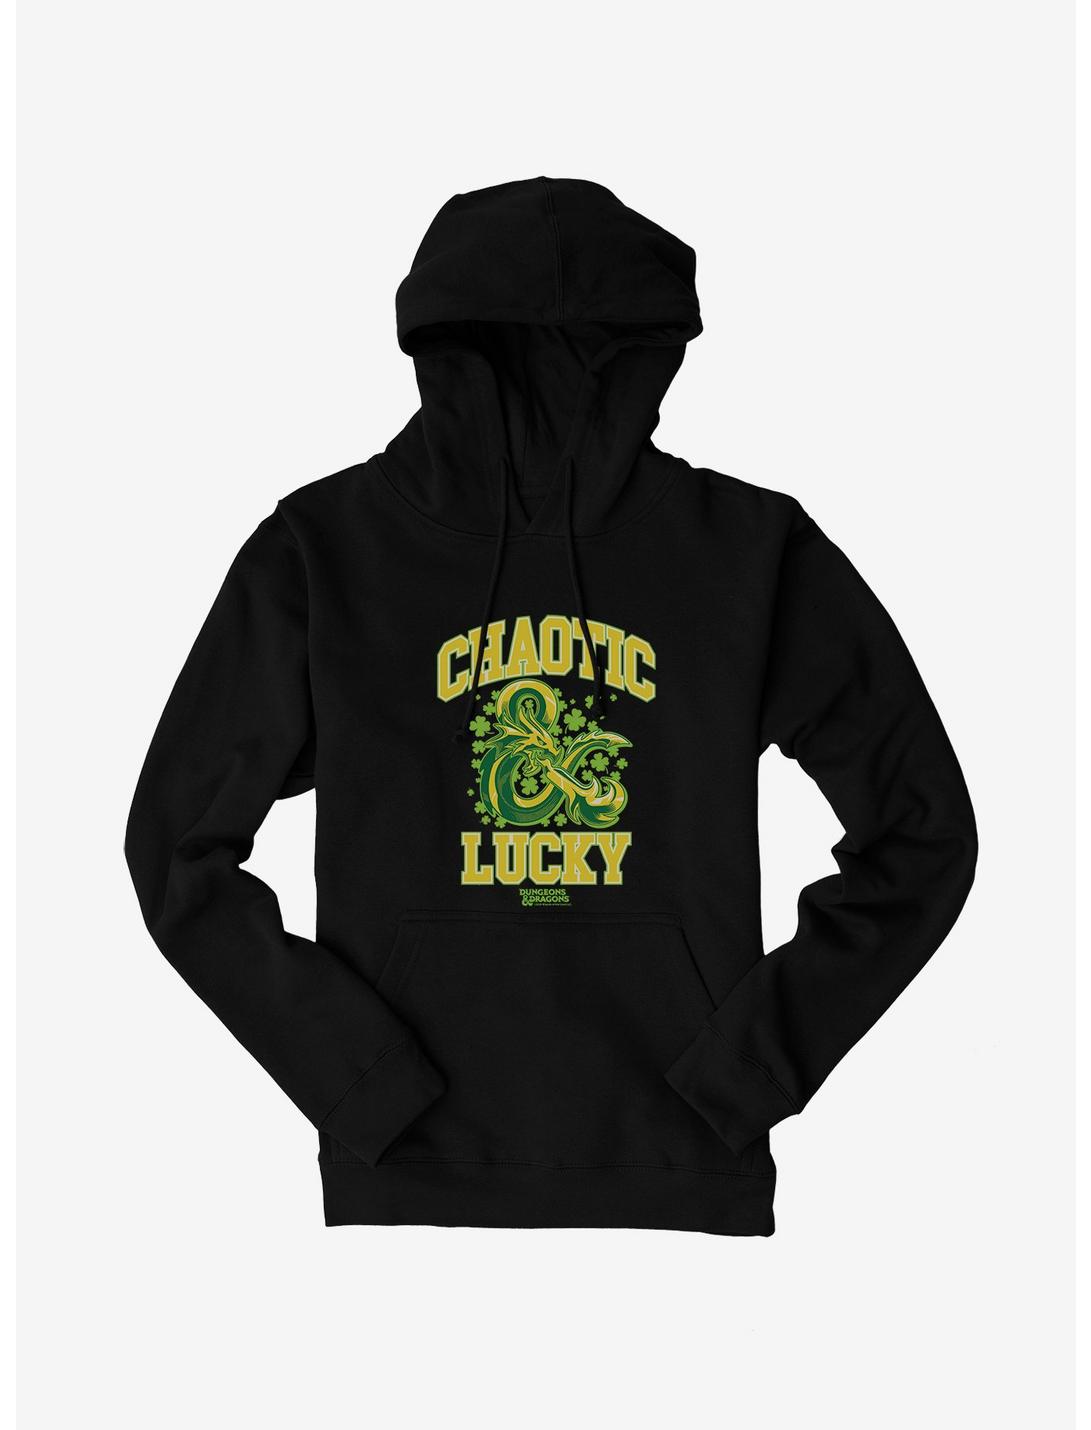 Dungeons & Dragons Chaotic And Lucky Hoodie, BLACK, hi-res